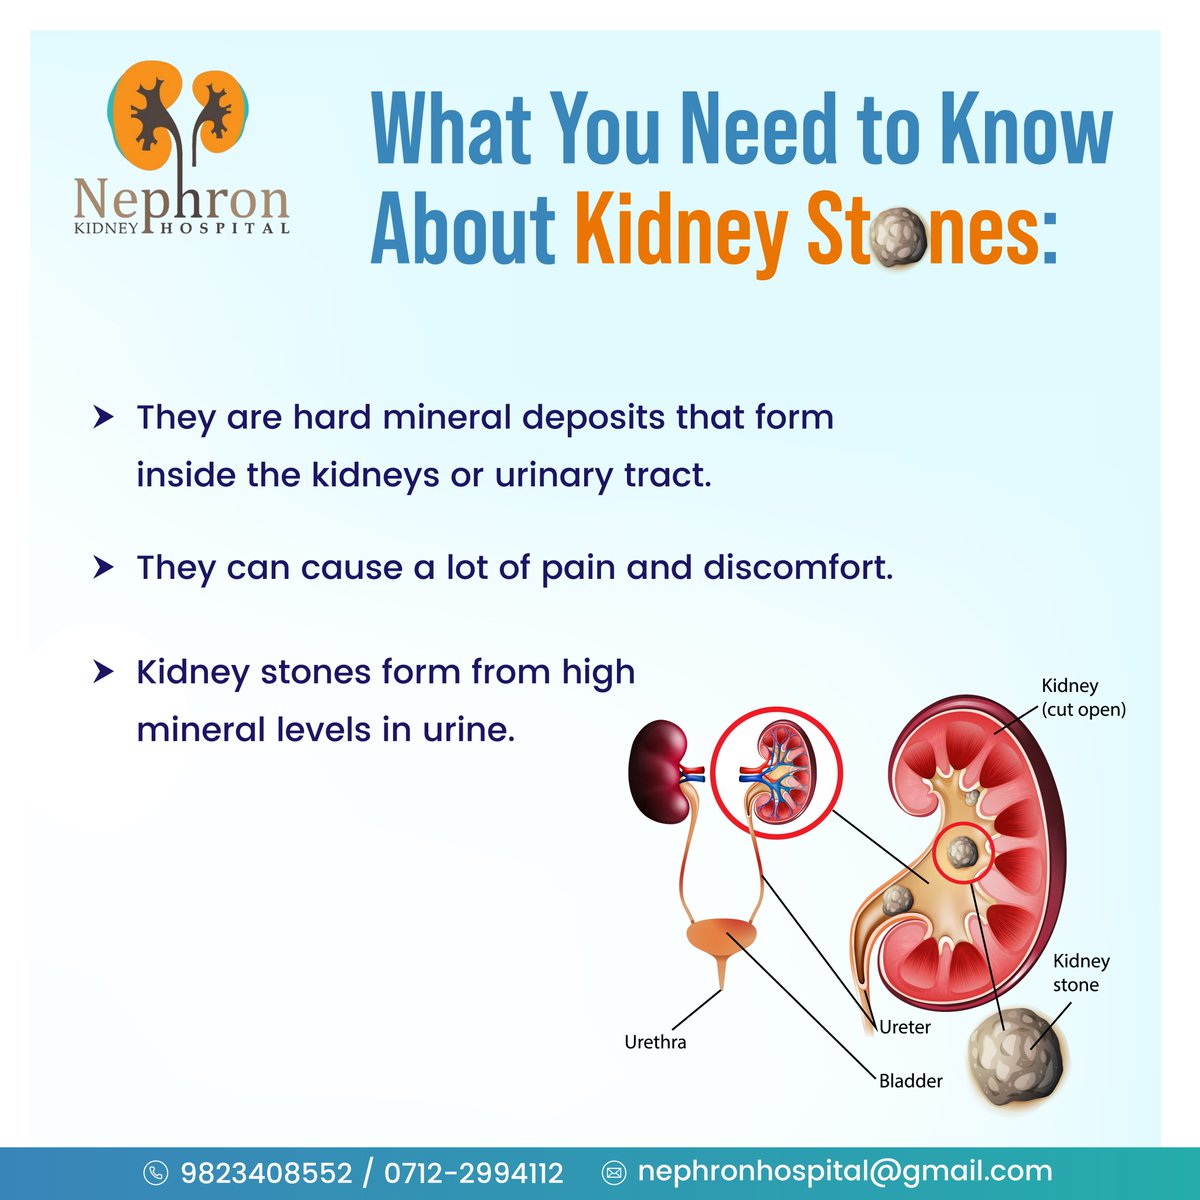 What you need to know about Kidney Stones:

#nephronhospitalnagpur #bestdialysiscenterinnagpur #dialysisunitnagpur #dialysiscenterinnagpur #bestkidneyhospitalinnagpur #kidneyhospitalinnagpur #
#KidneyStones #RenalCalcul #StoneInKidney #Urolithiasis #PainfulUrination